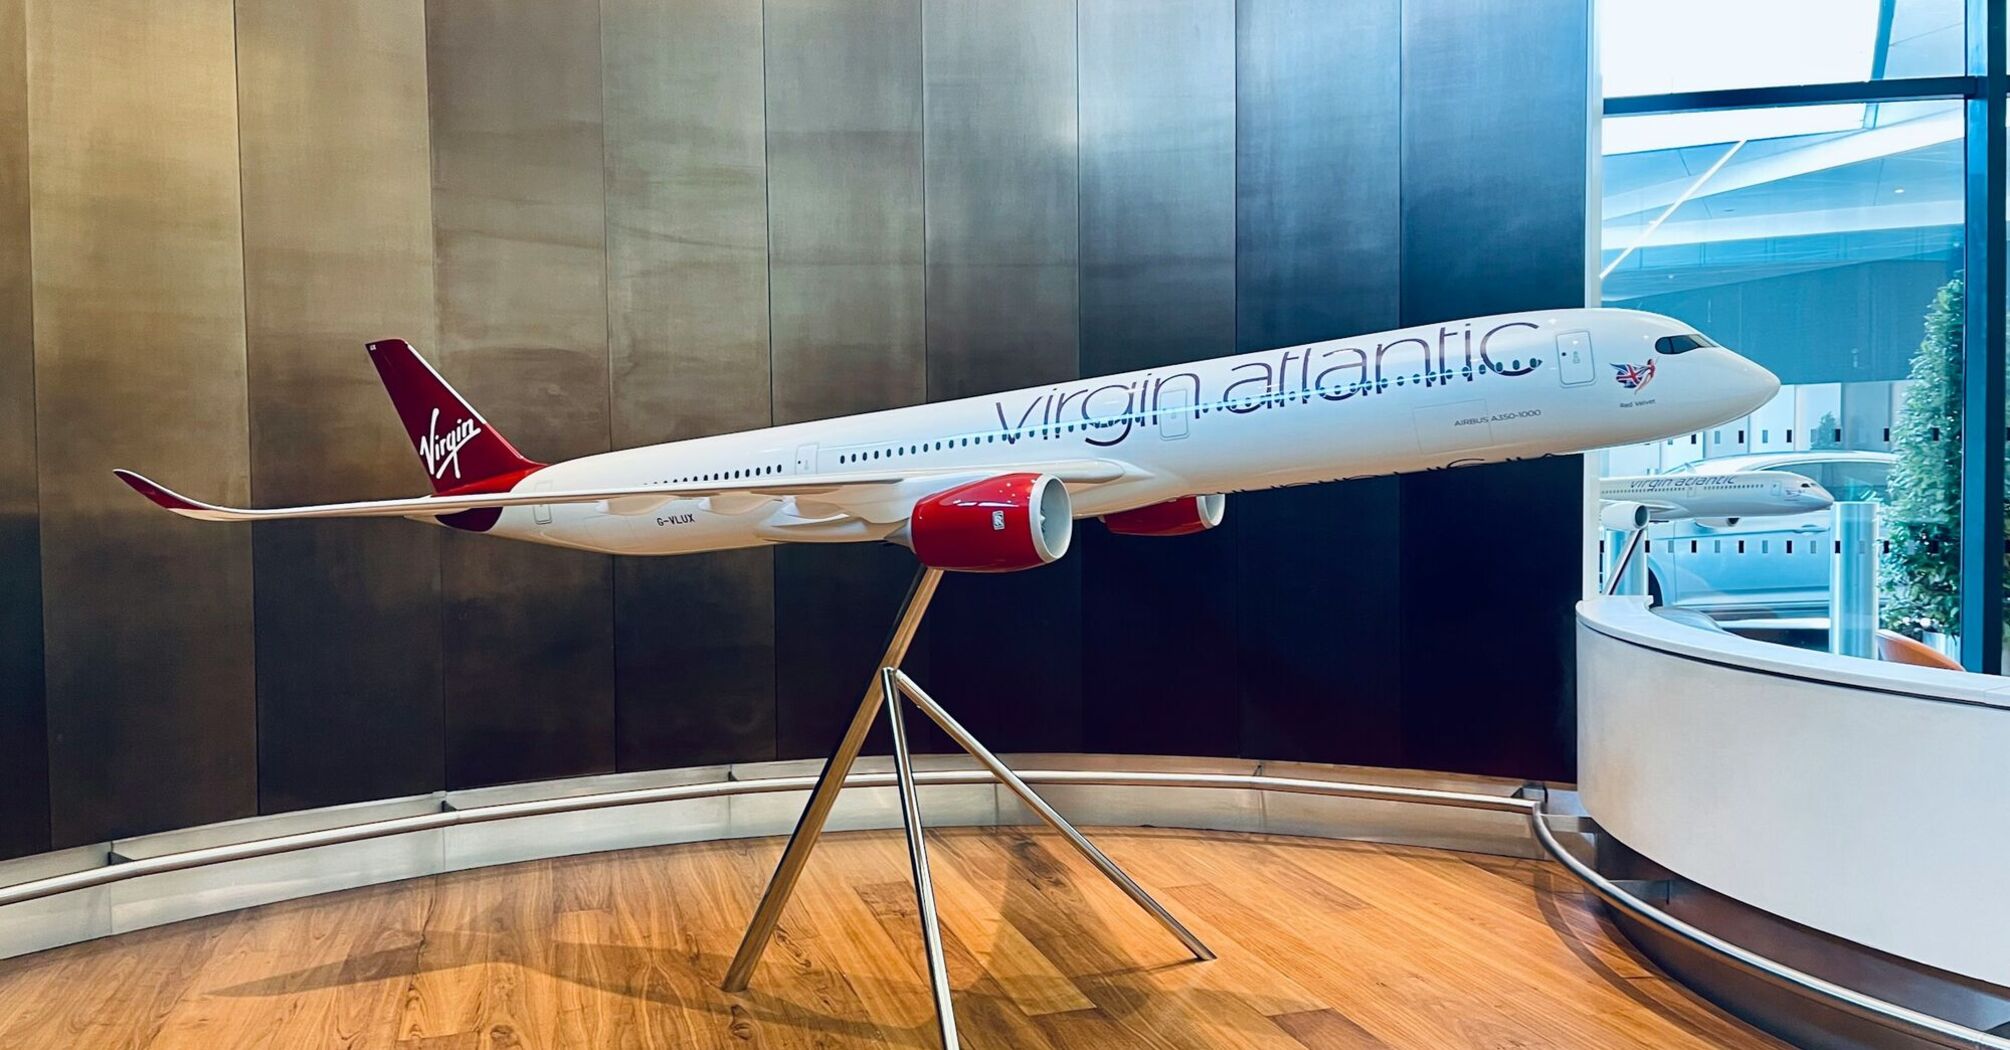 Virgin Atlantic Airbus airplane model on stand in airport lounge